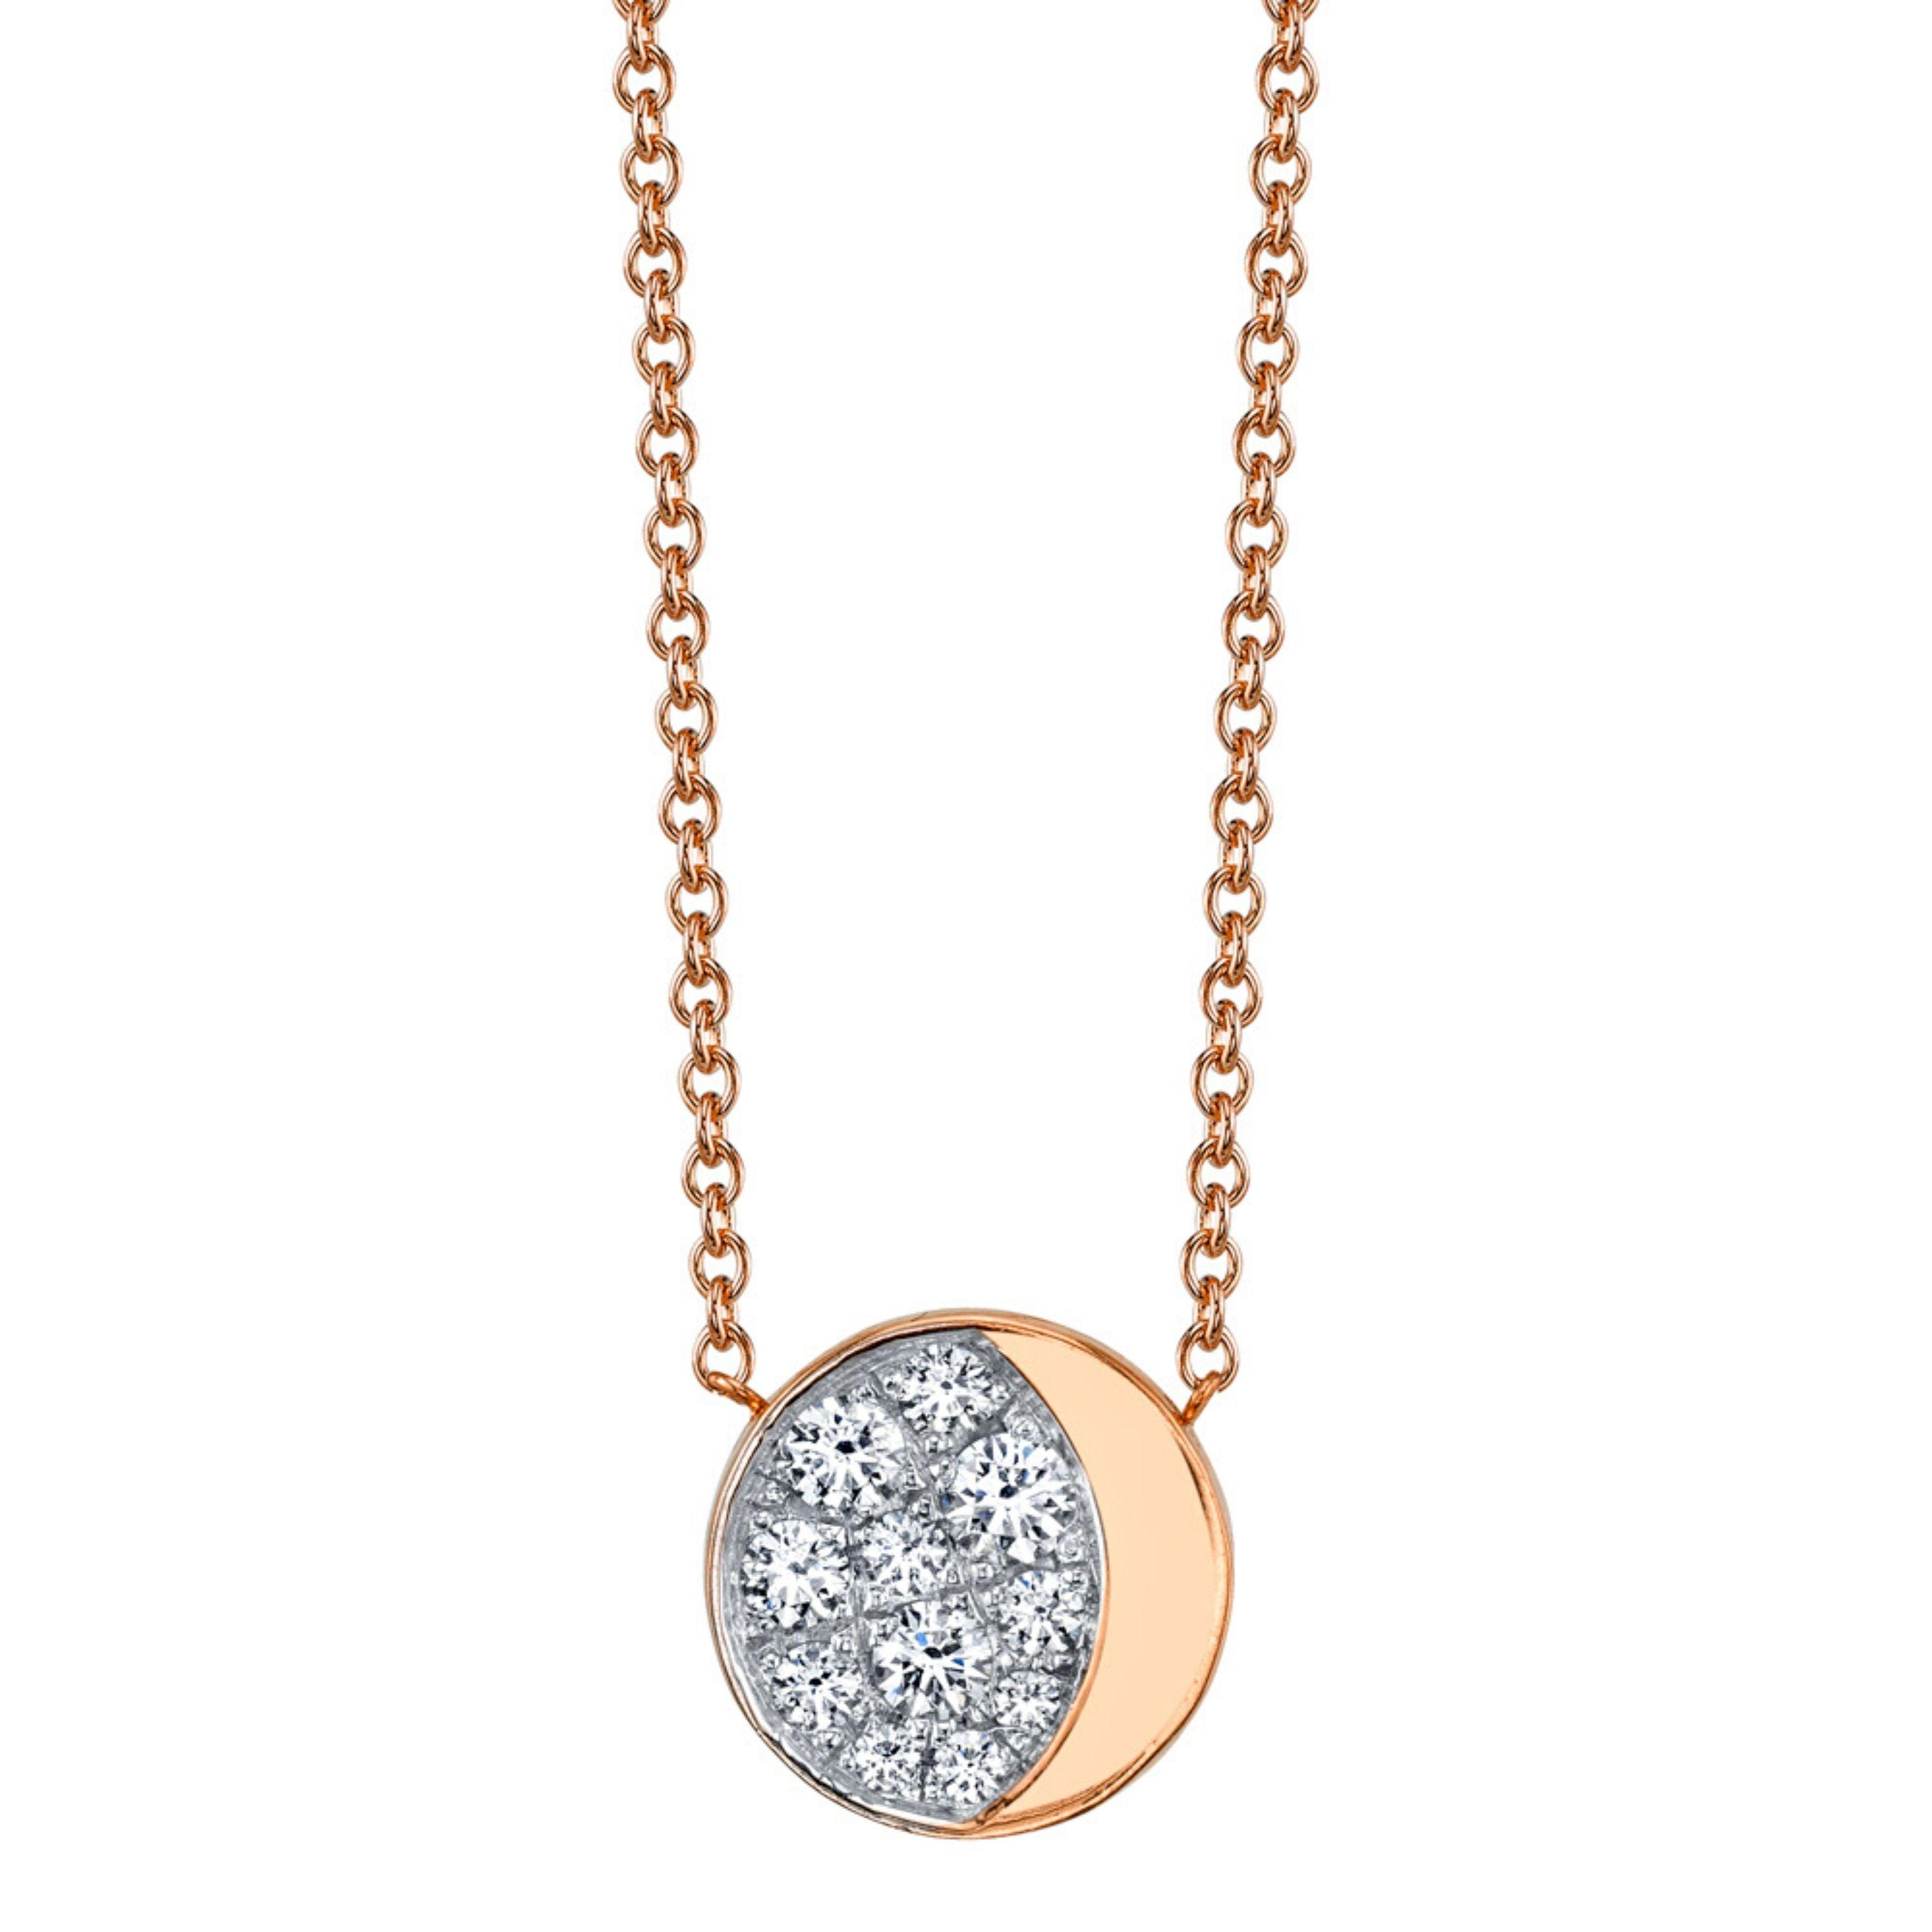 Marrow Fine Jewelry White Diamond Gibbous Moon Phase Circle Pendant With Solid Gold Chain